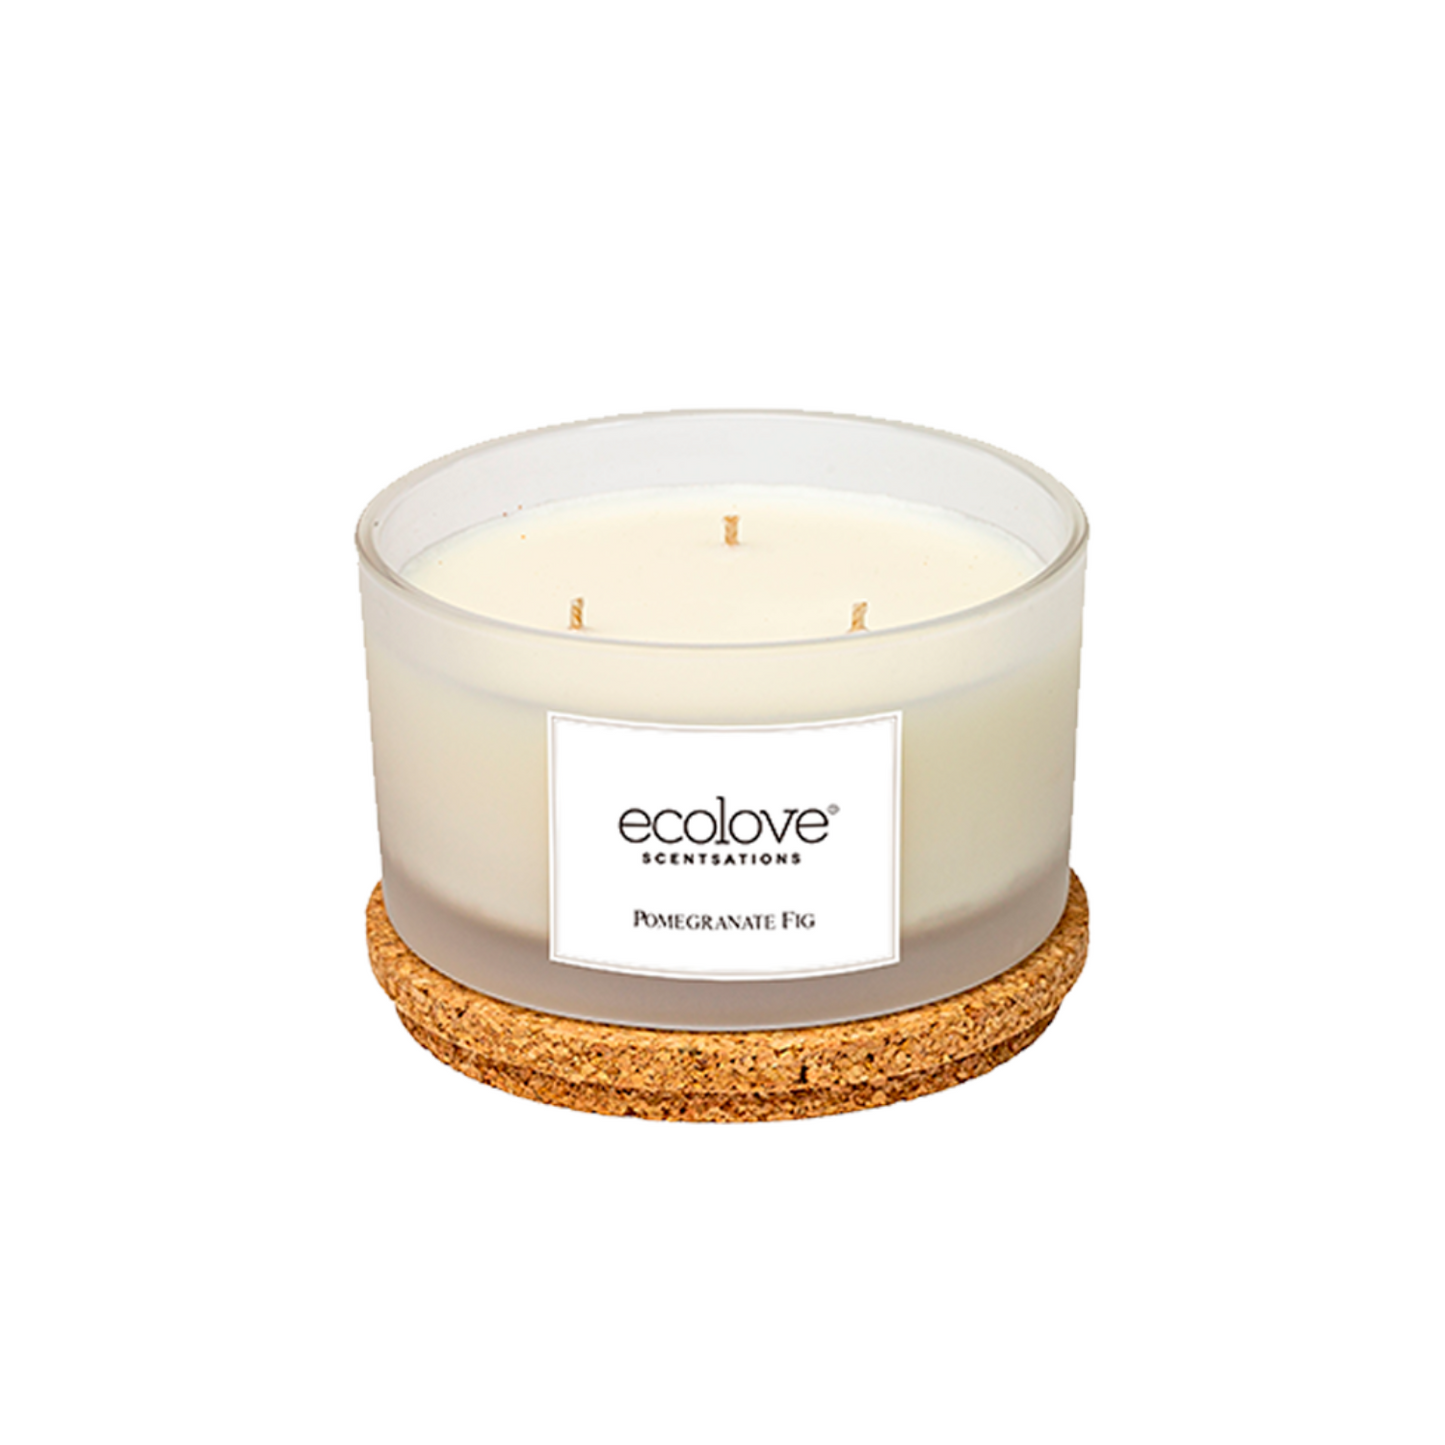 Ecolove 3-Wick Pomegranate Fig Candle